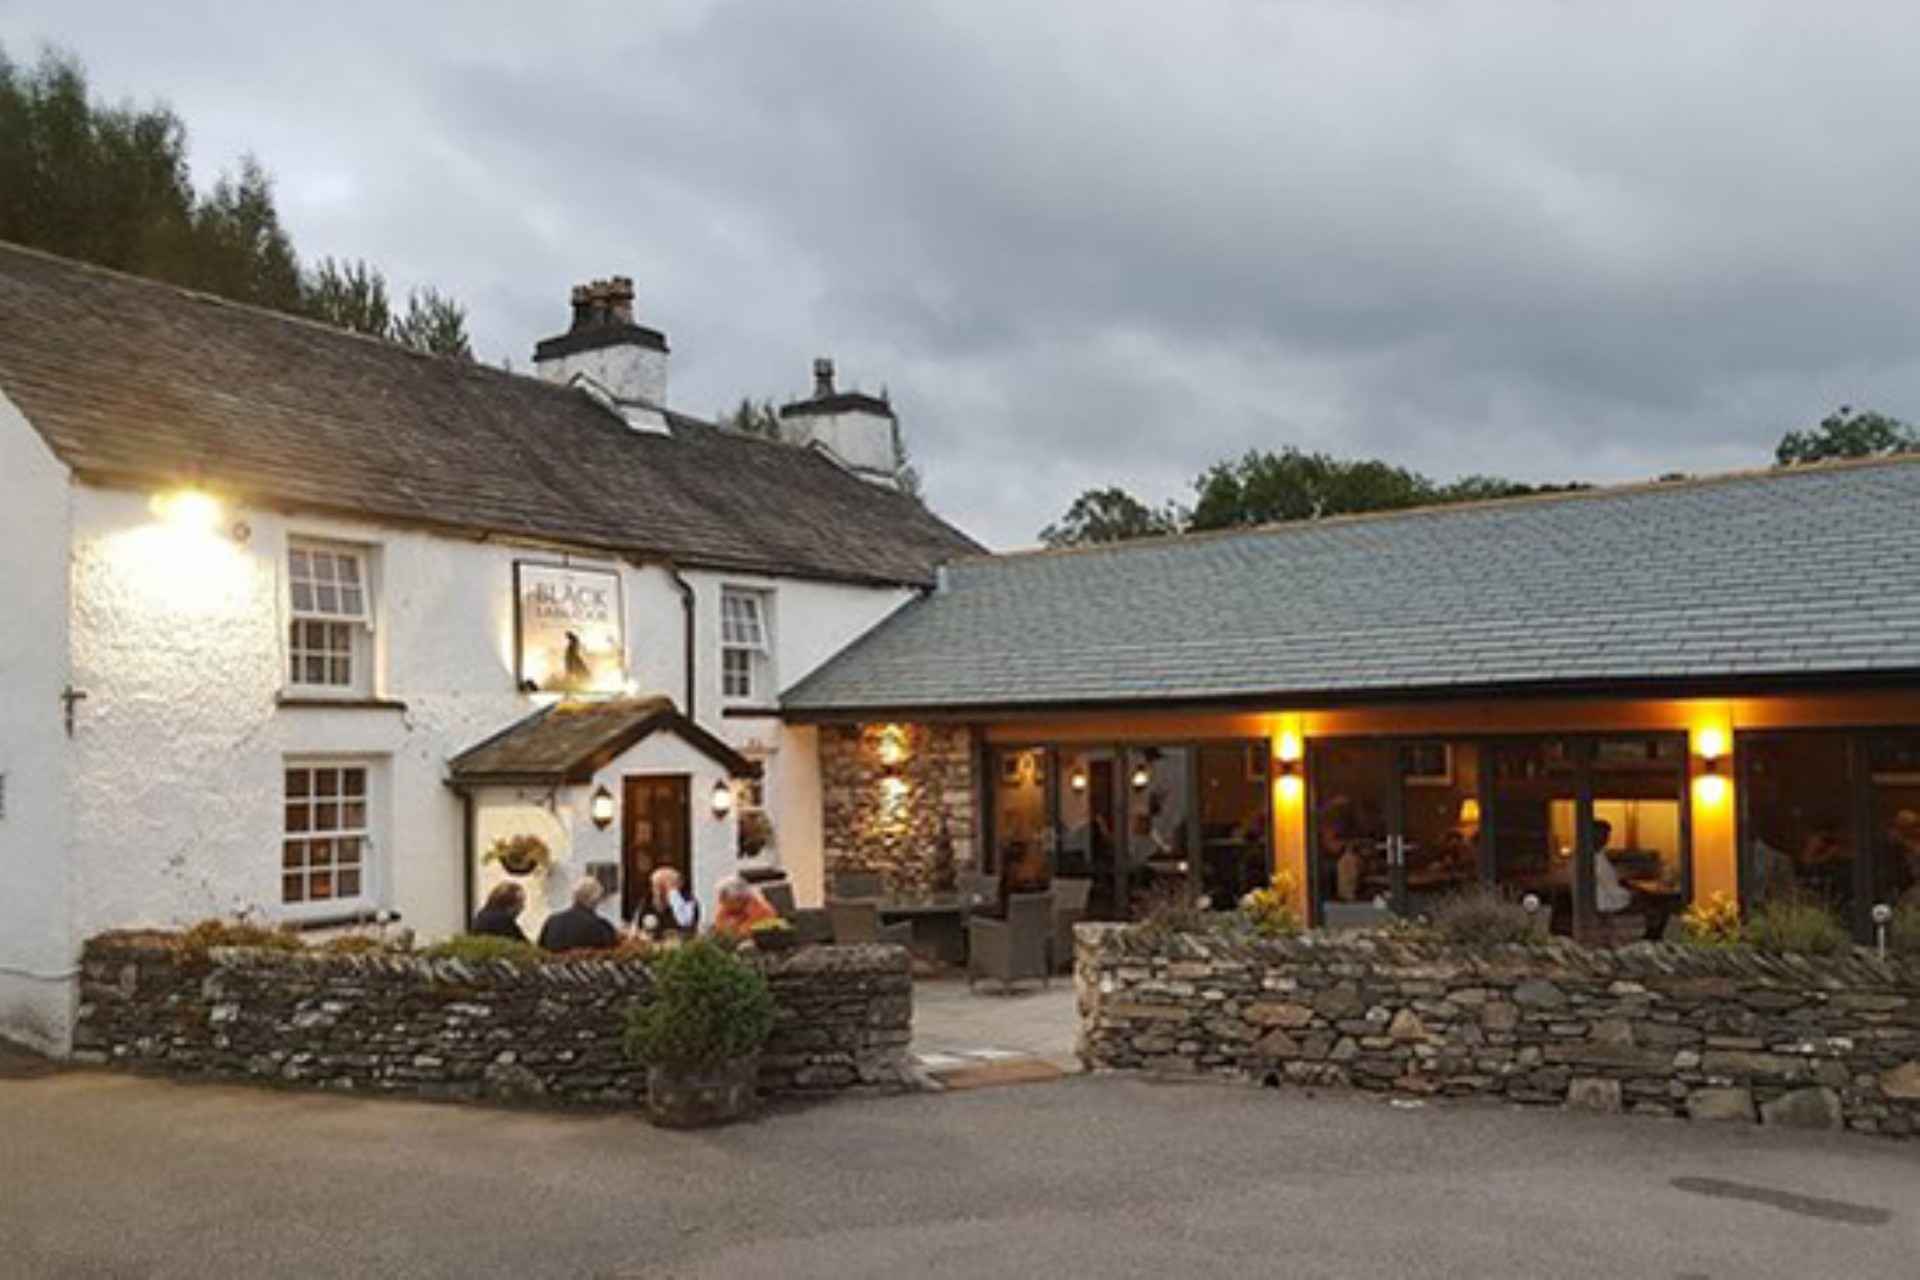 <p><strong>Village Pubs Near Windermere</strong></p><p>Last week, we went to The Manor House pub for dinner.